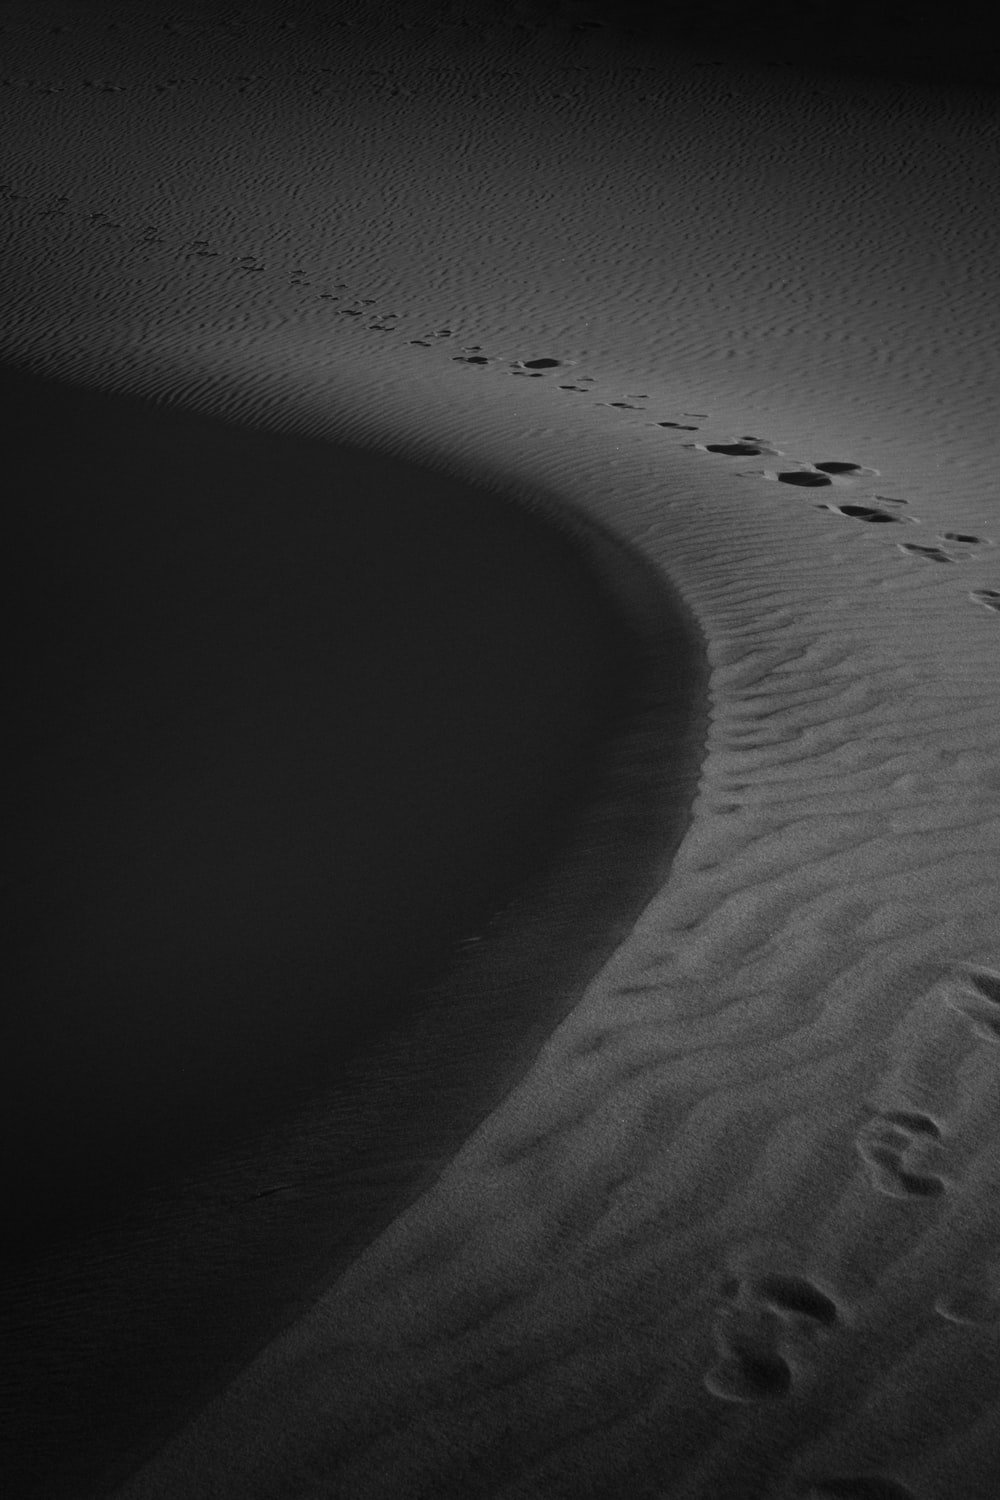 Footsteps Picture. Download Free Image